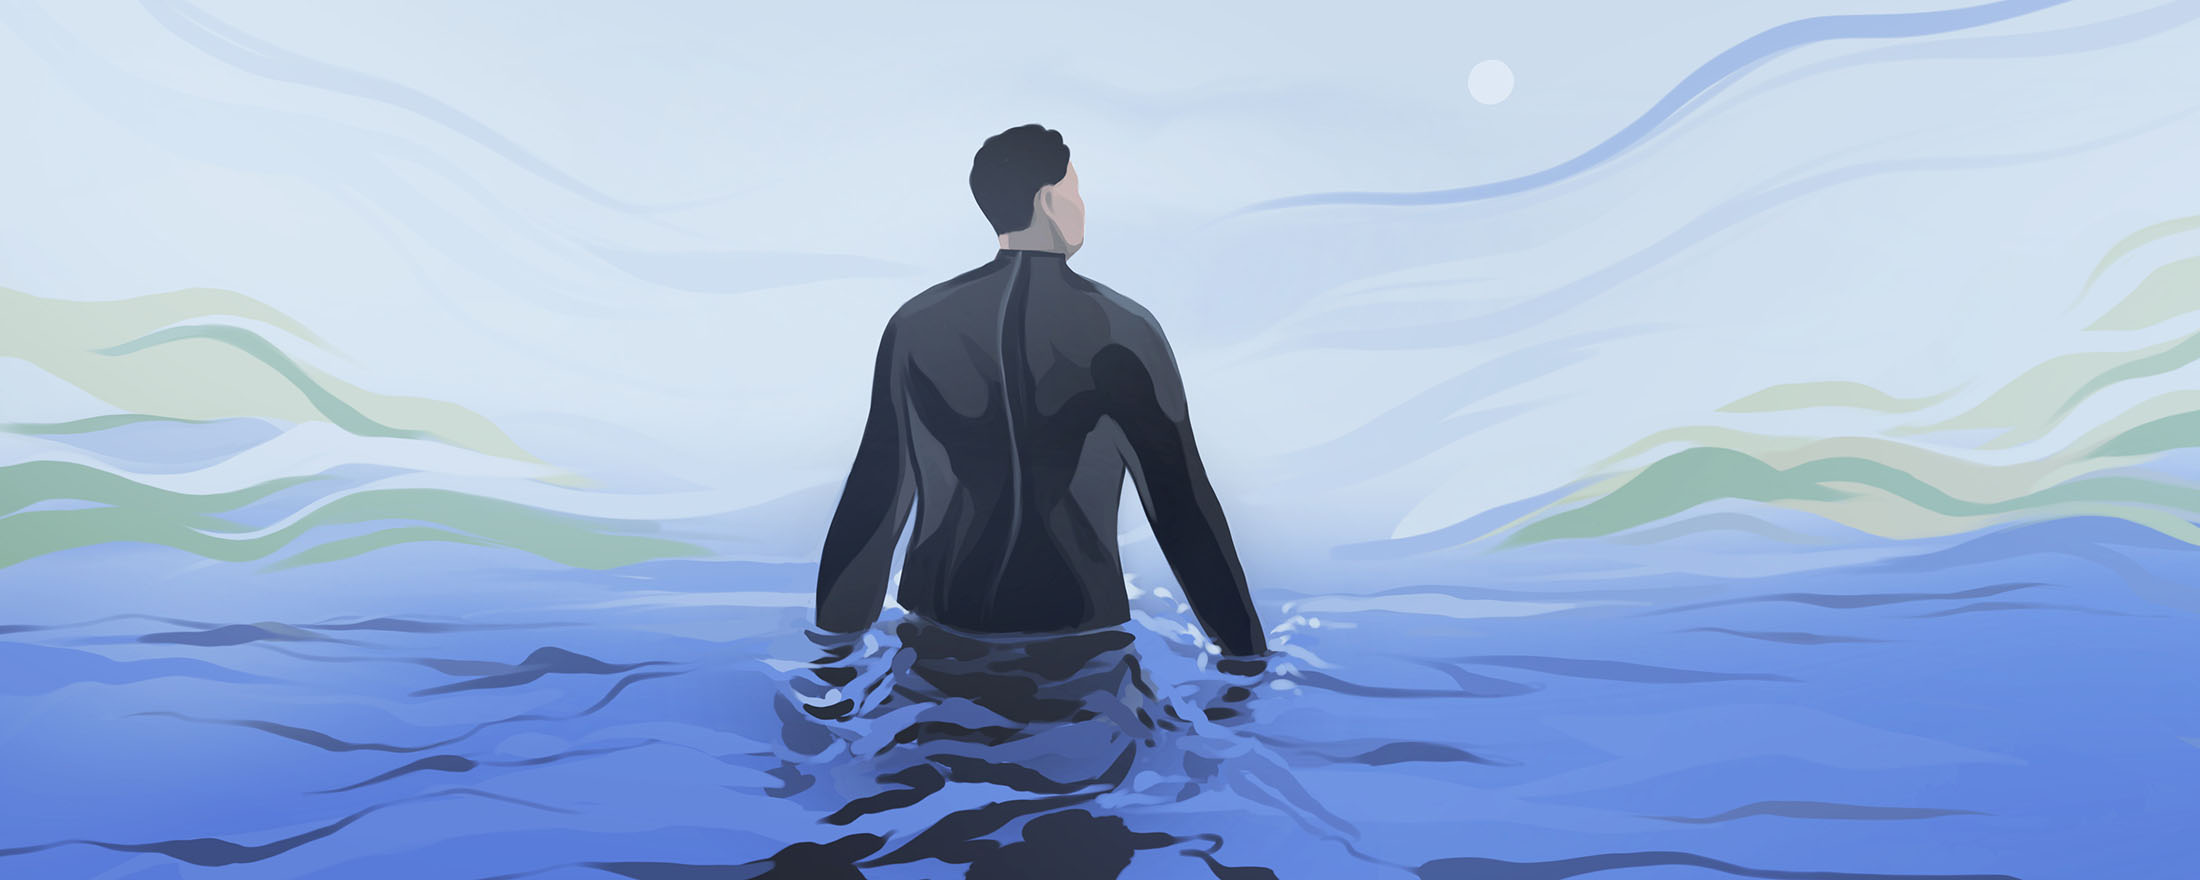 An illustration of a person in a wetsuit standing in dark blue water